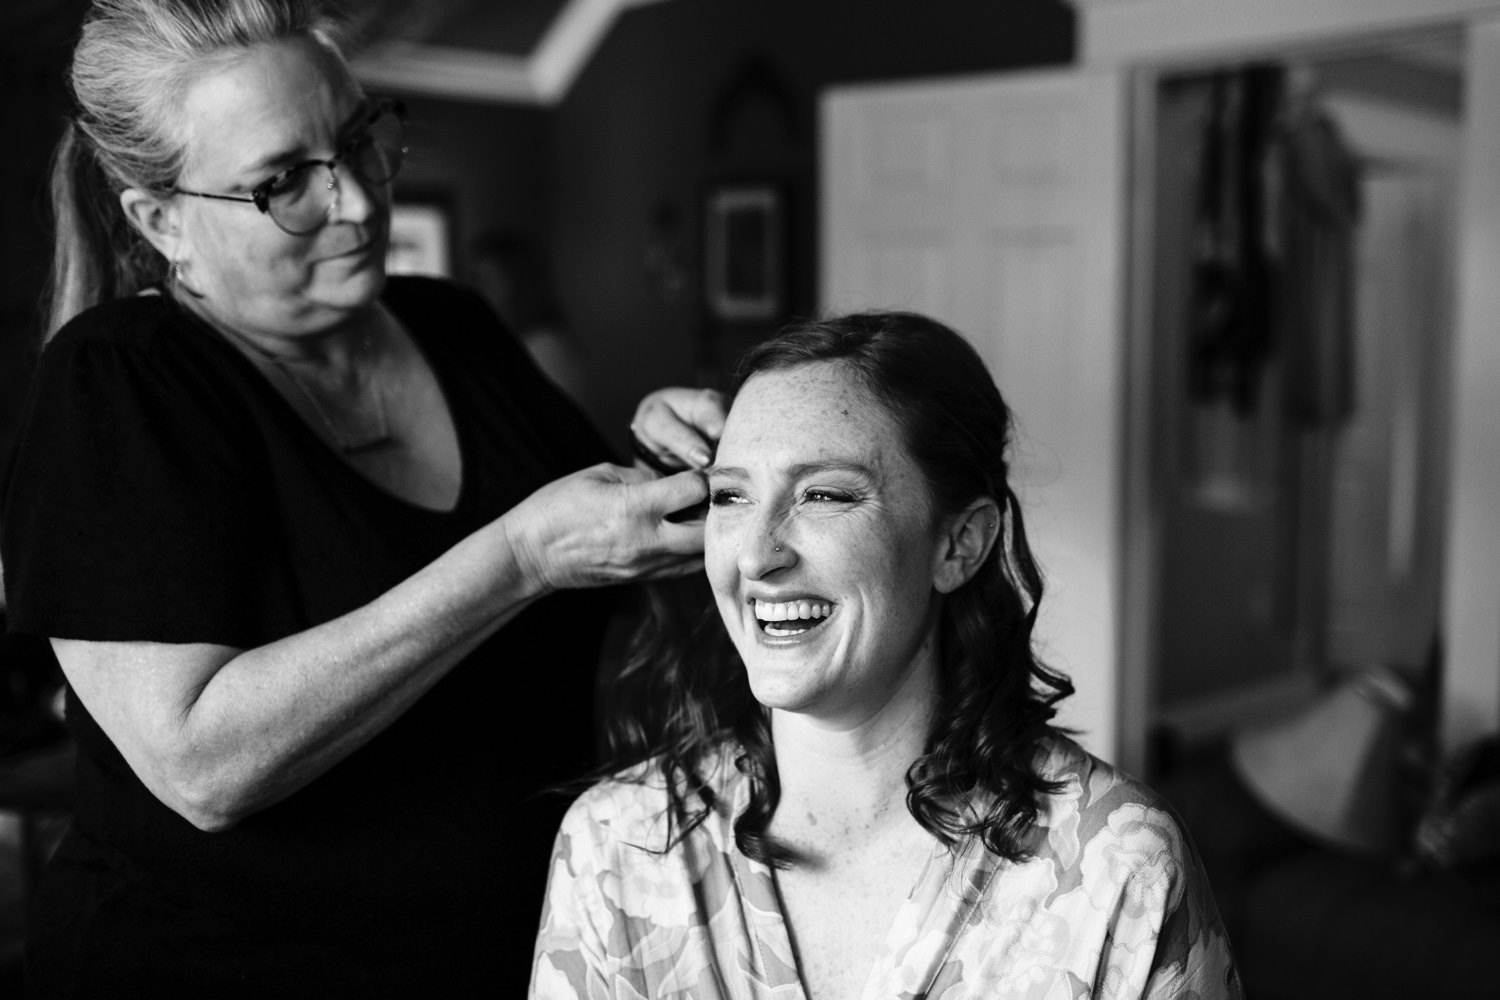 bride getting her hair done on wedding day